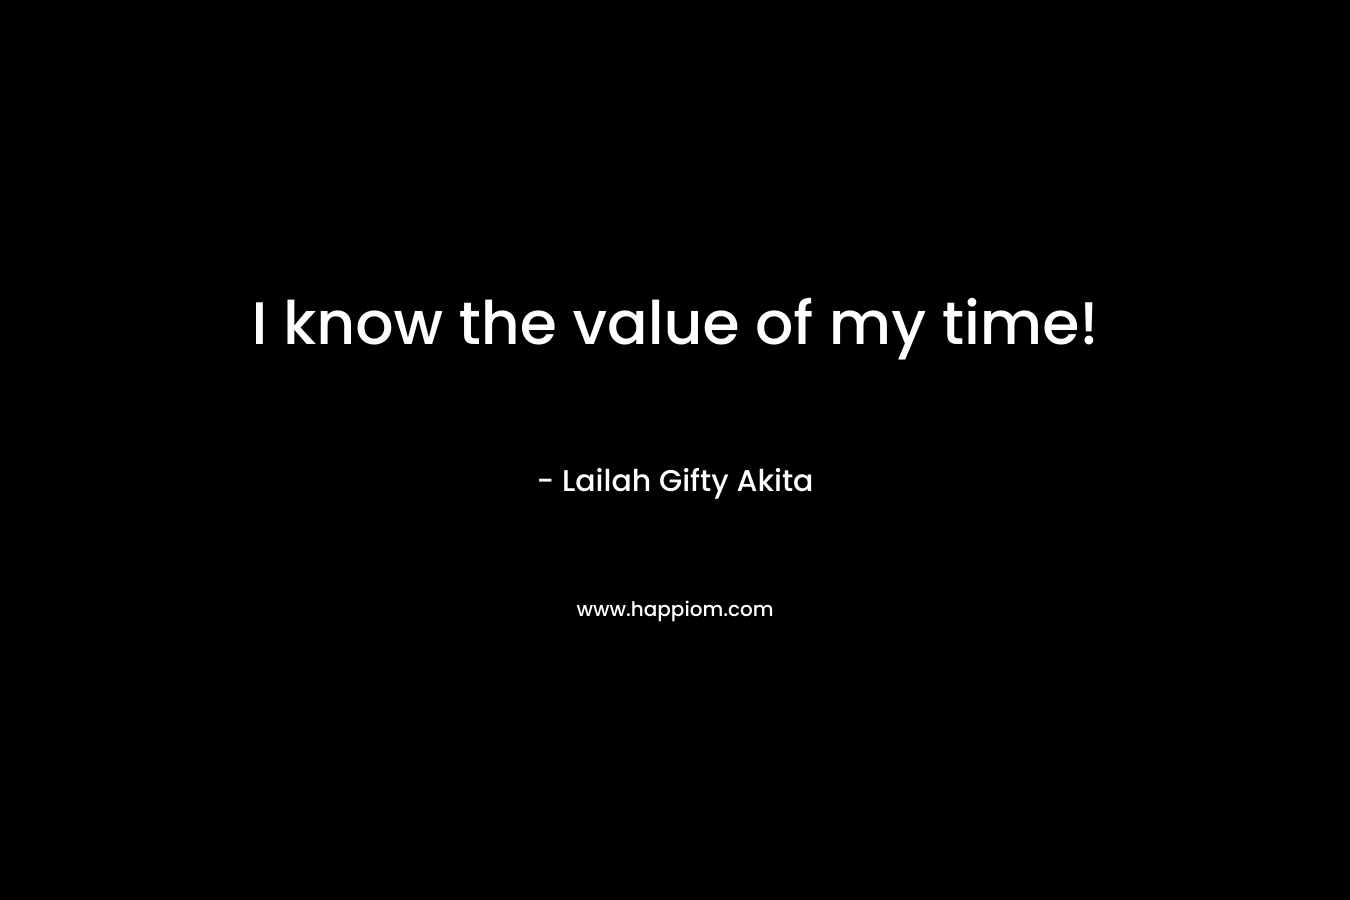 I know the value of my time!